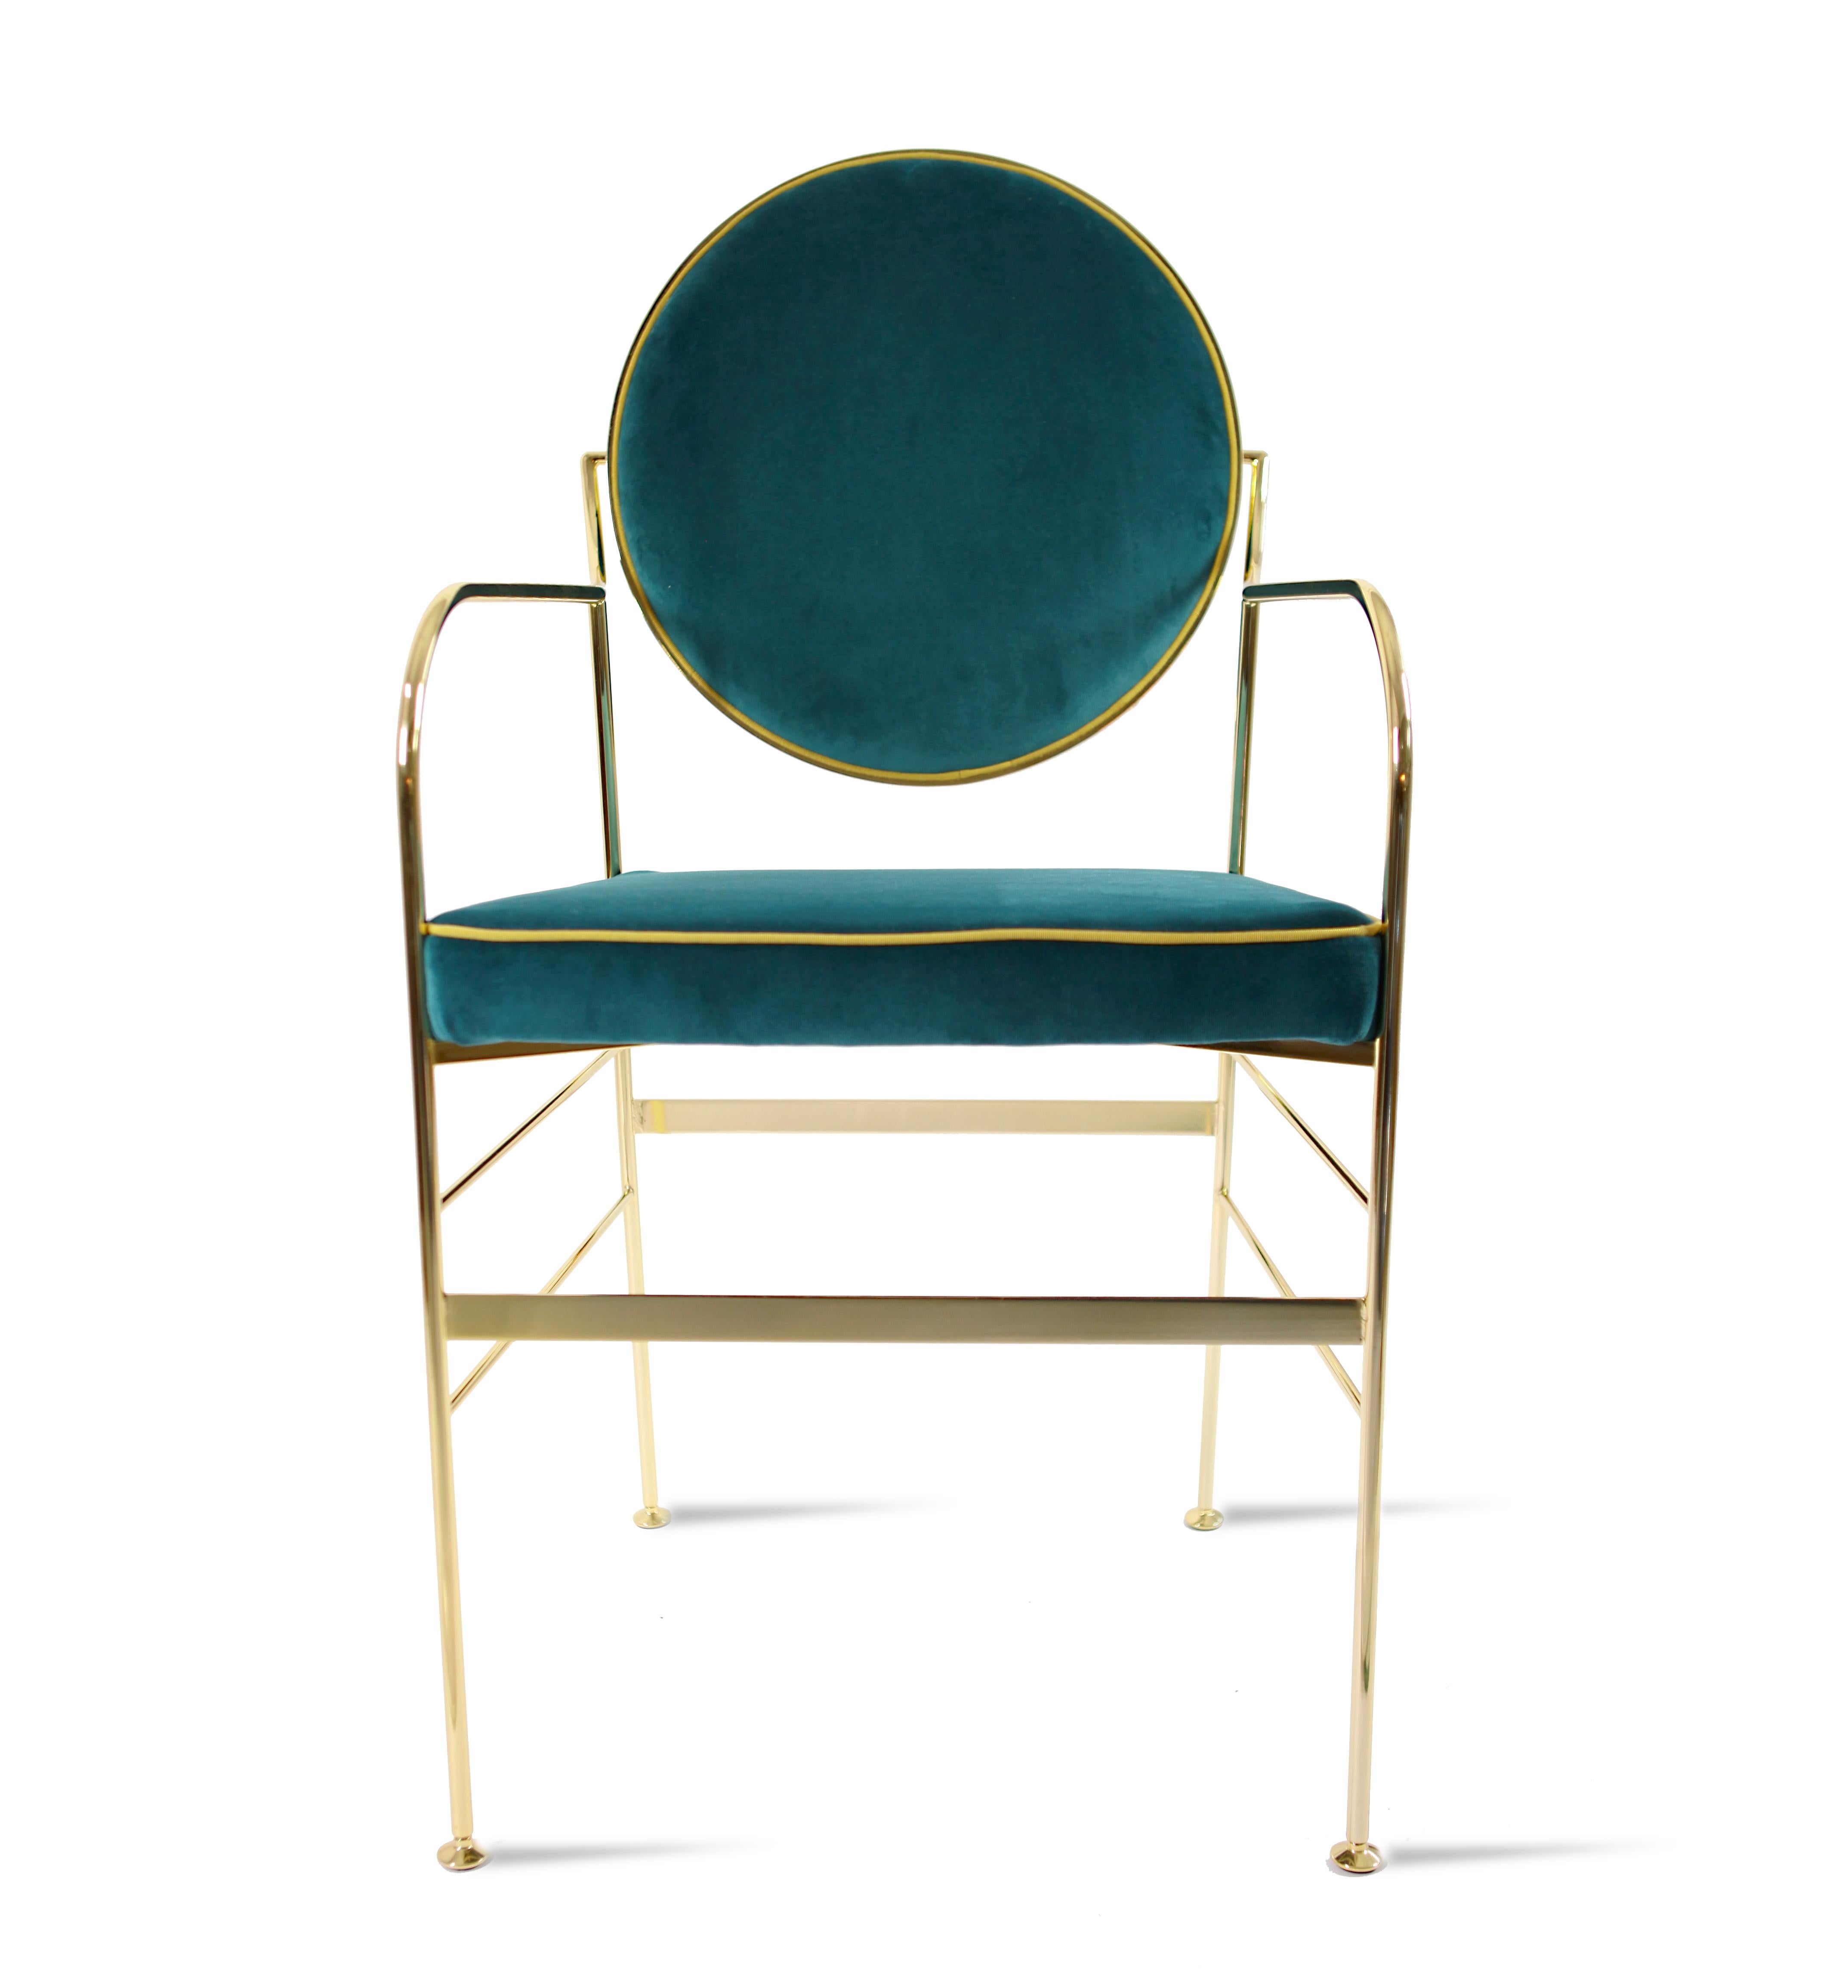 This striking chair has an iron structure covered with a 24-karat gold flash plating, and elegant galvanized brass feet. The back cushions (which move to achieve the perfect orientation) and the seat are covered in cotton velvet available in a range